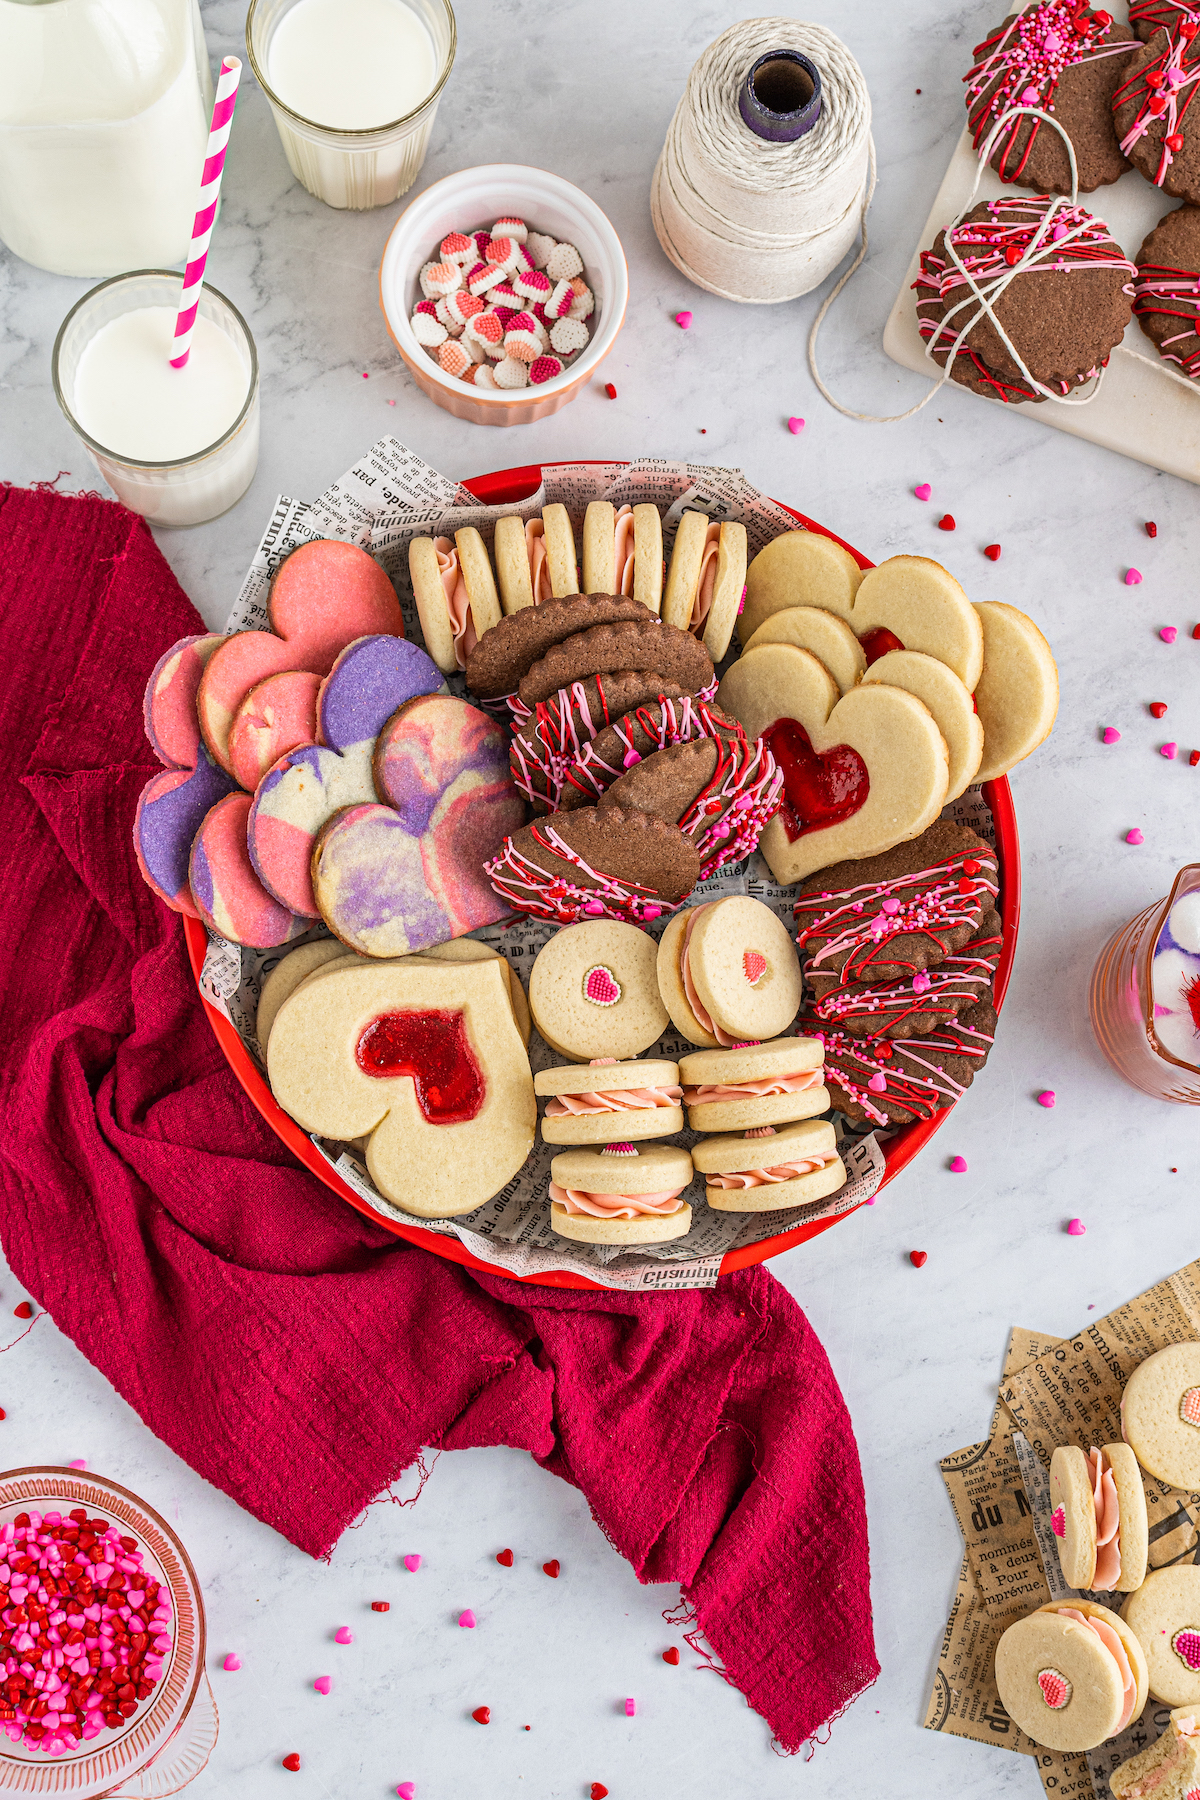 All kinds of Valentine's Day cookies on a cookie try with sprinkles and a red napkin.